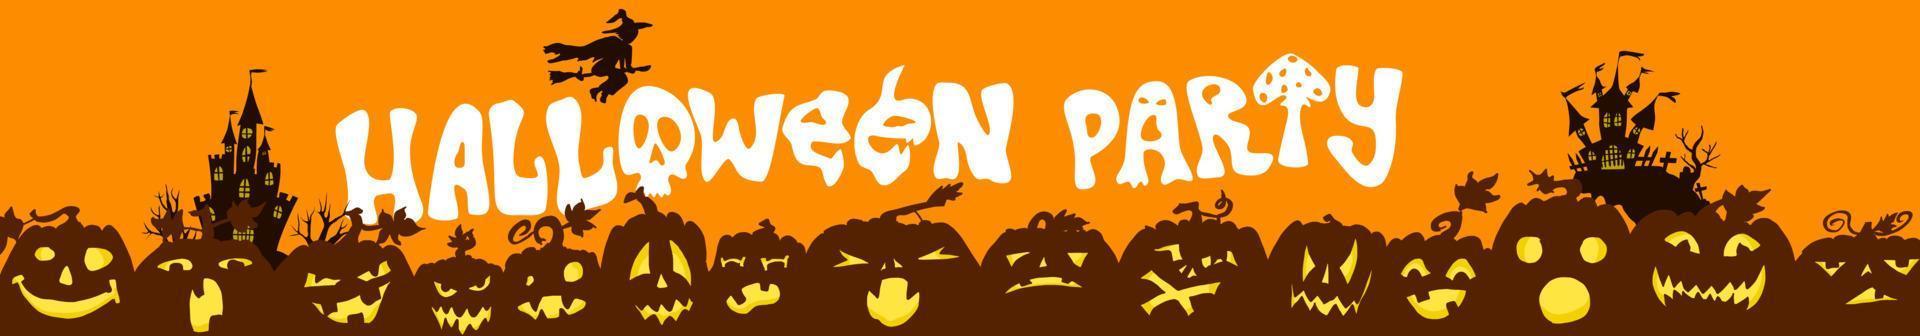 Halloween party poster. castles and pumpkins vector